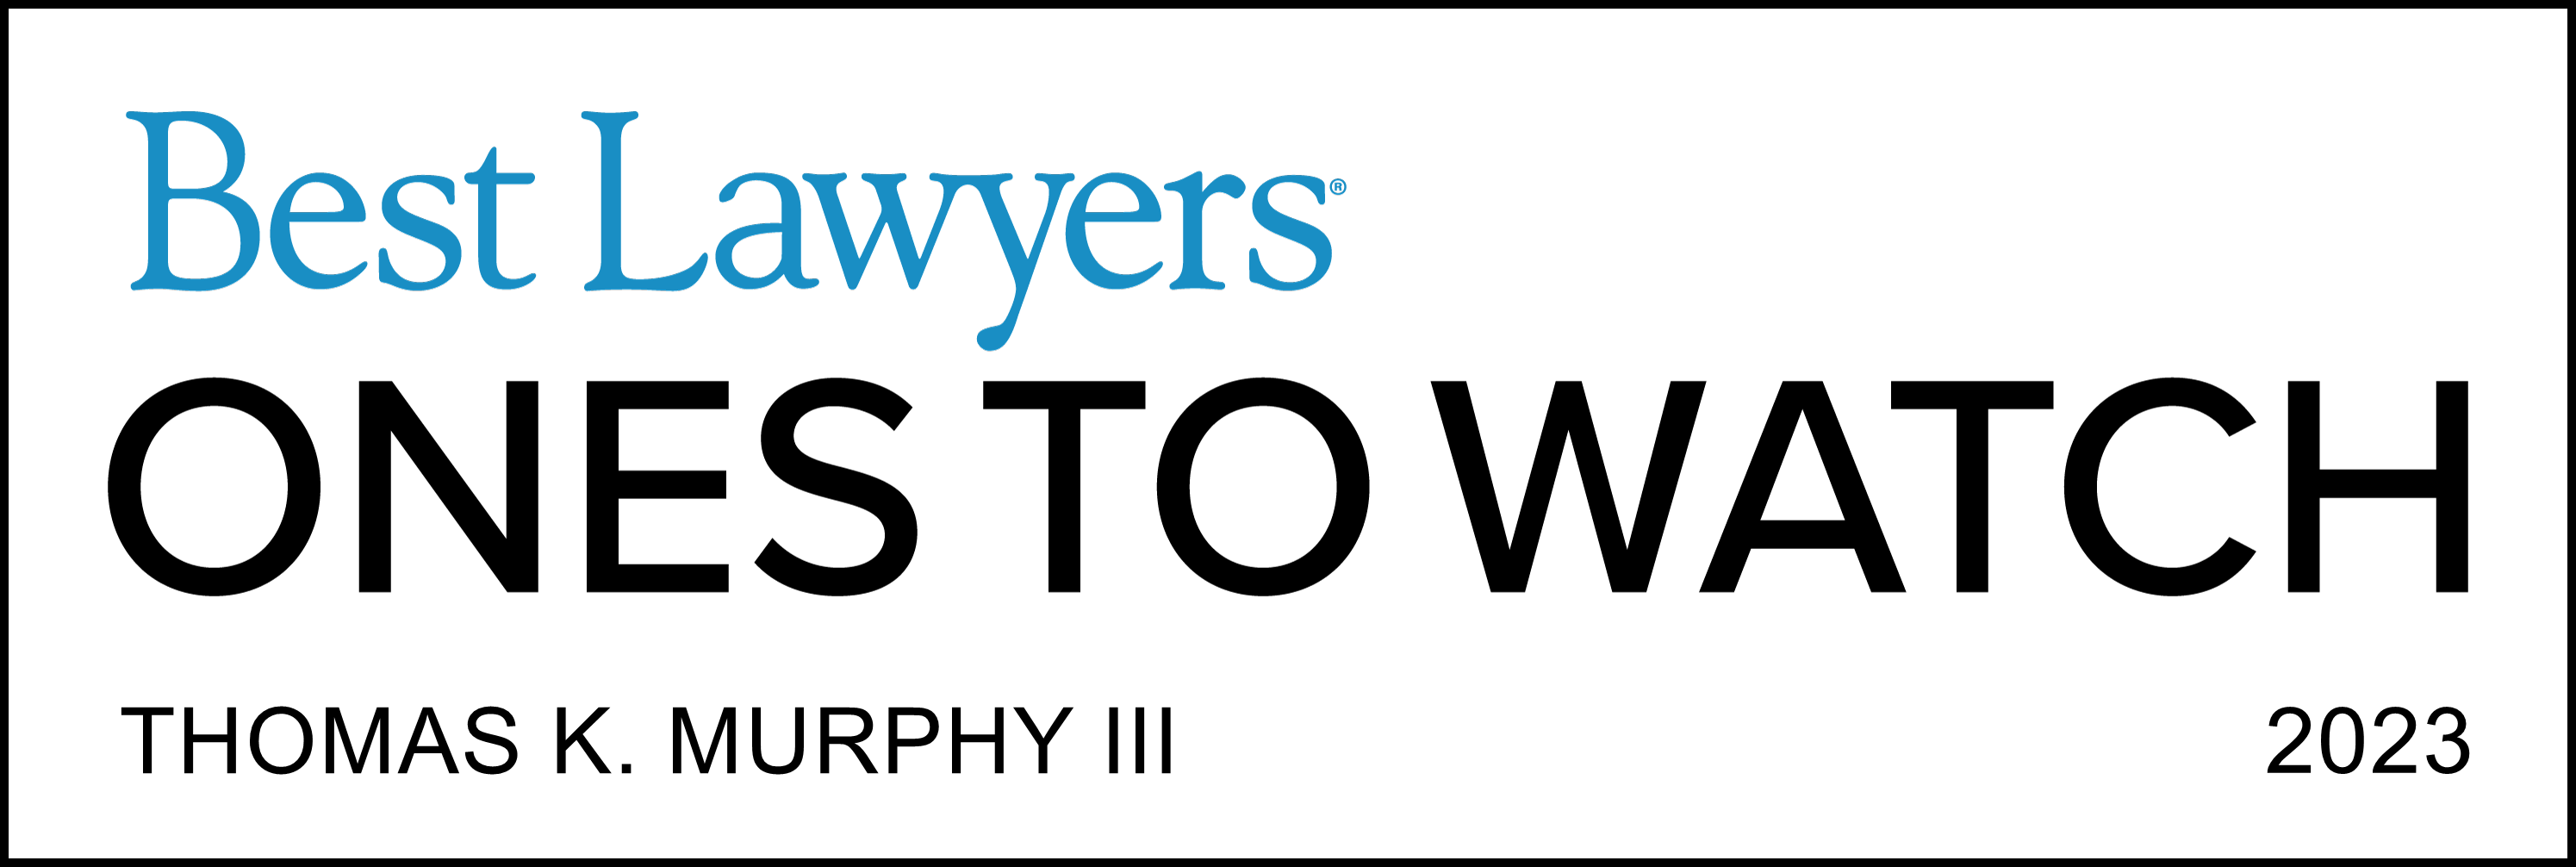 Thomas K. Murphy III Recognized by Best Lawyers Ones To Watch